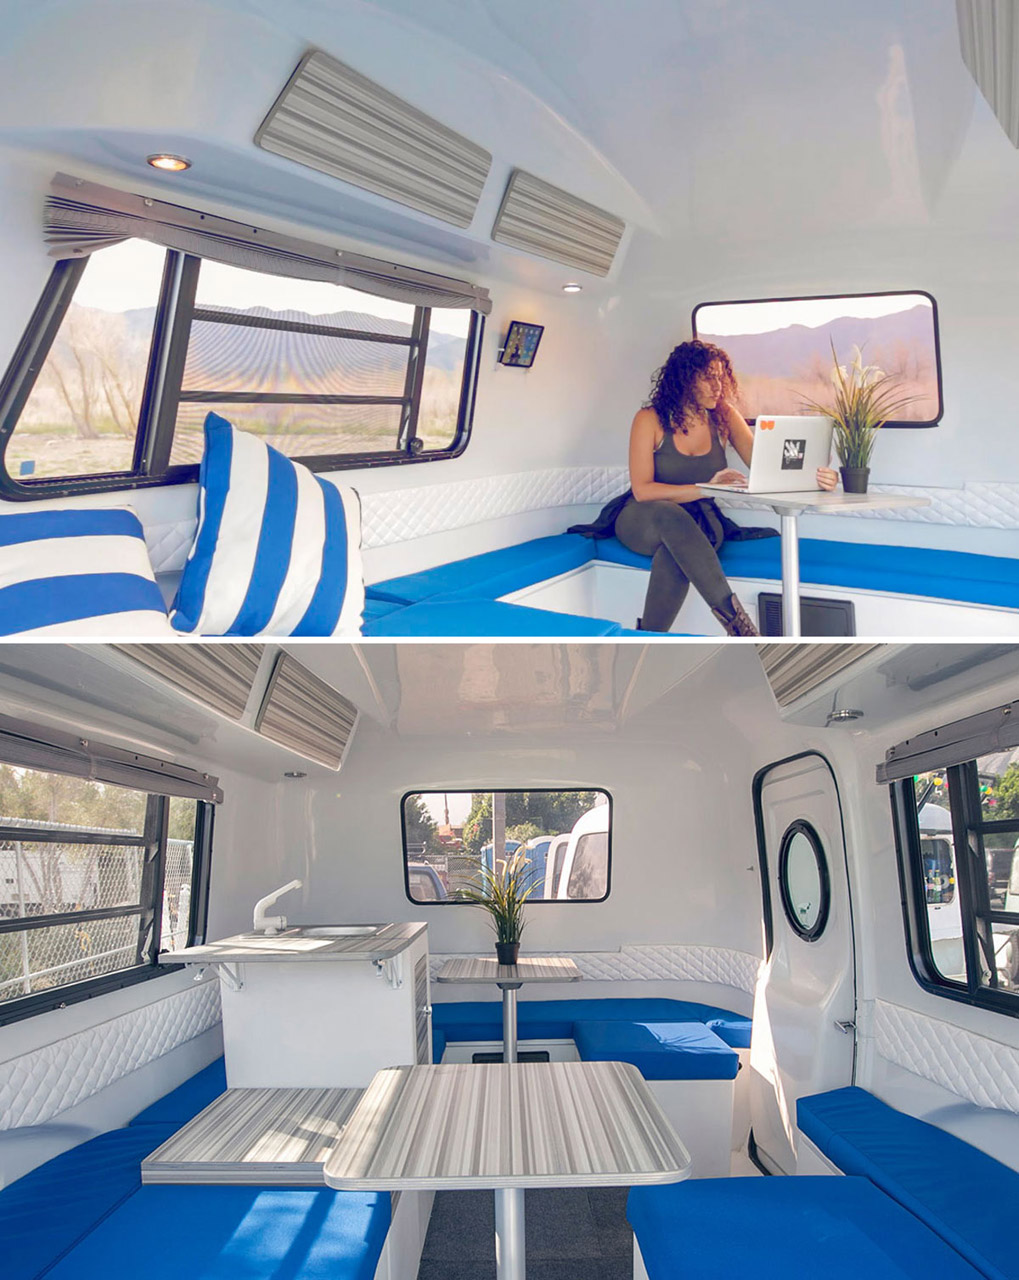 The Coolest Modern RV, and Campers - Design